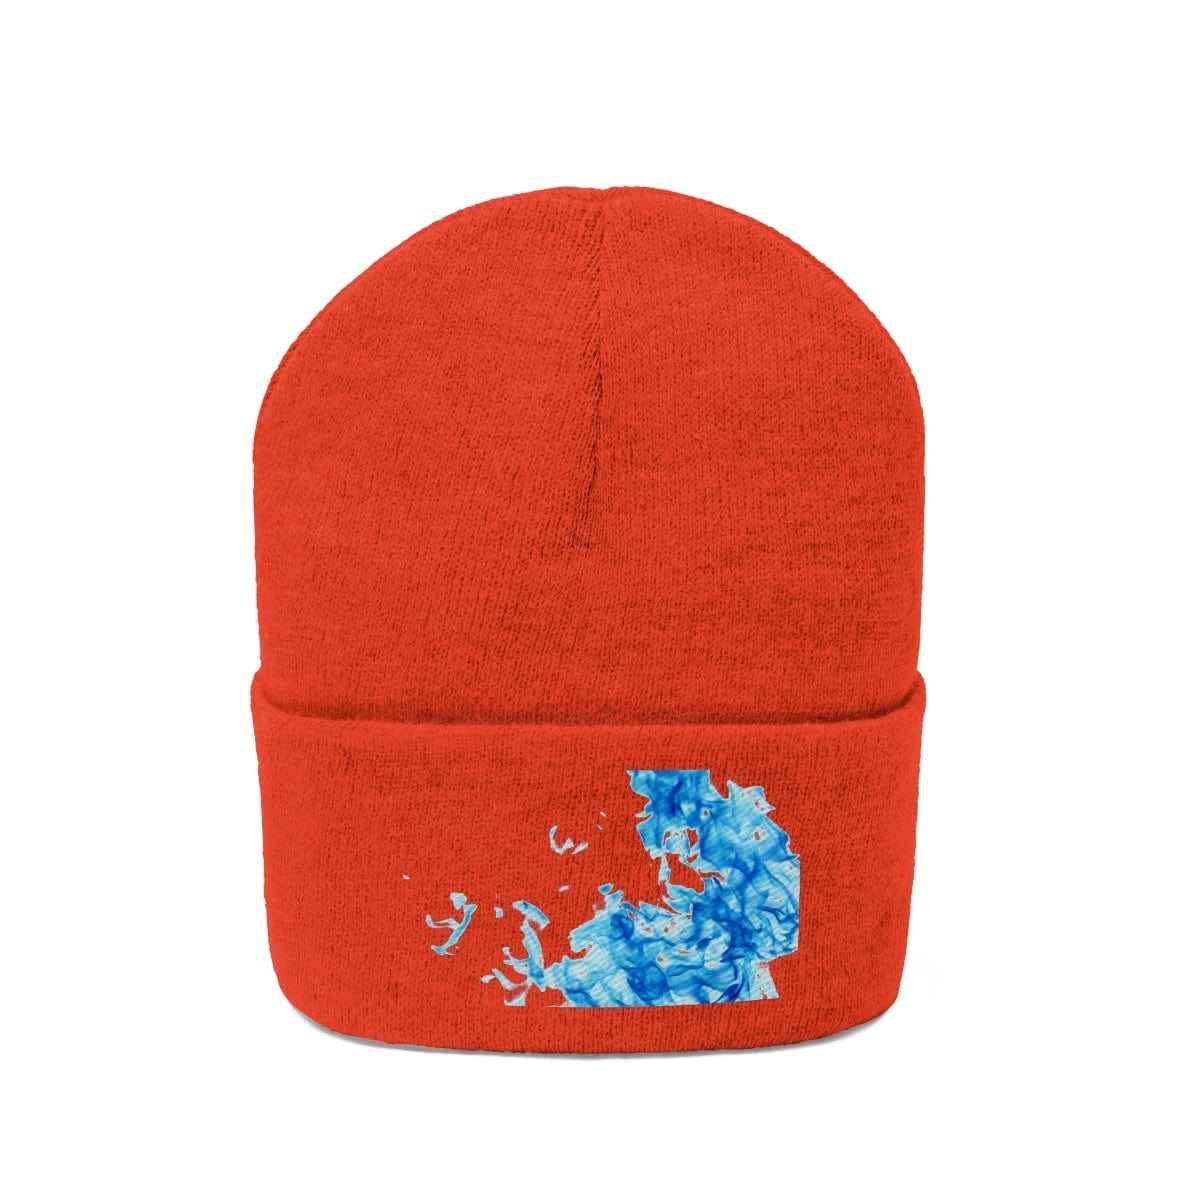 The Neon Pink Big Ocean Wave Beanie Knitted Hat